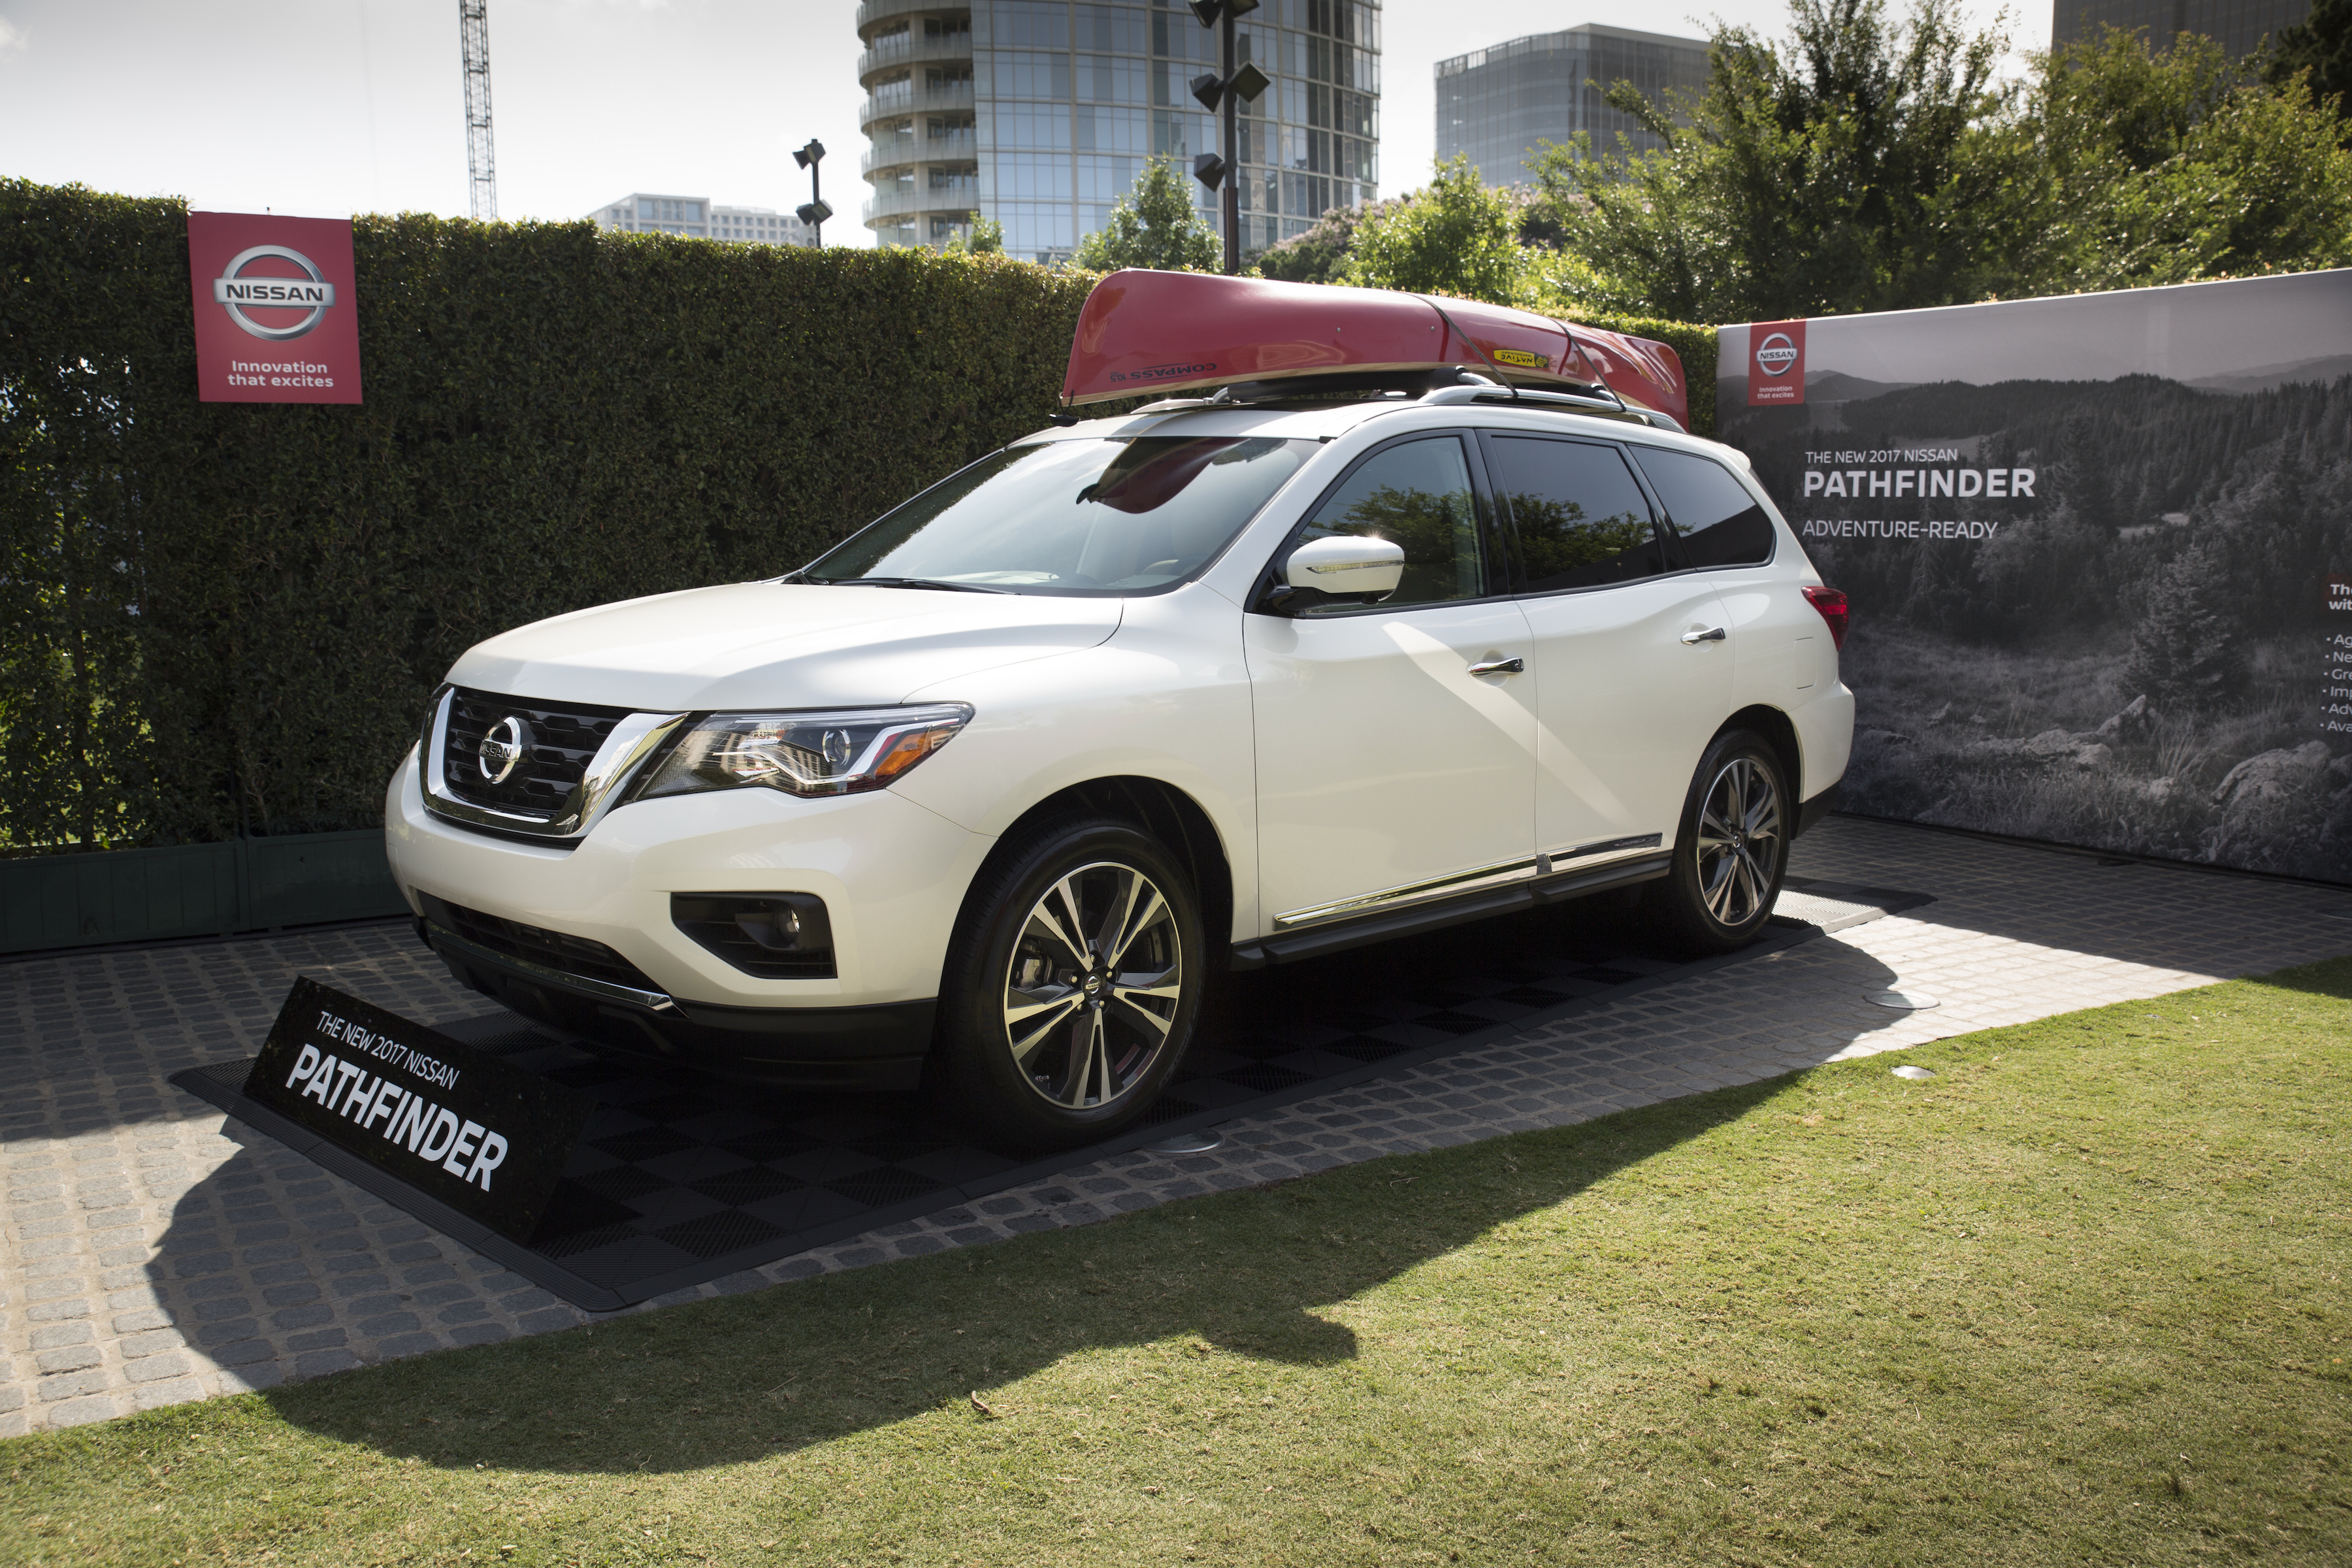 Nissan Pathfinder accessories specifications